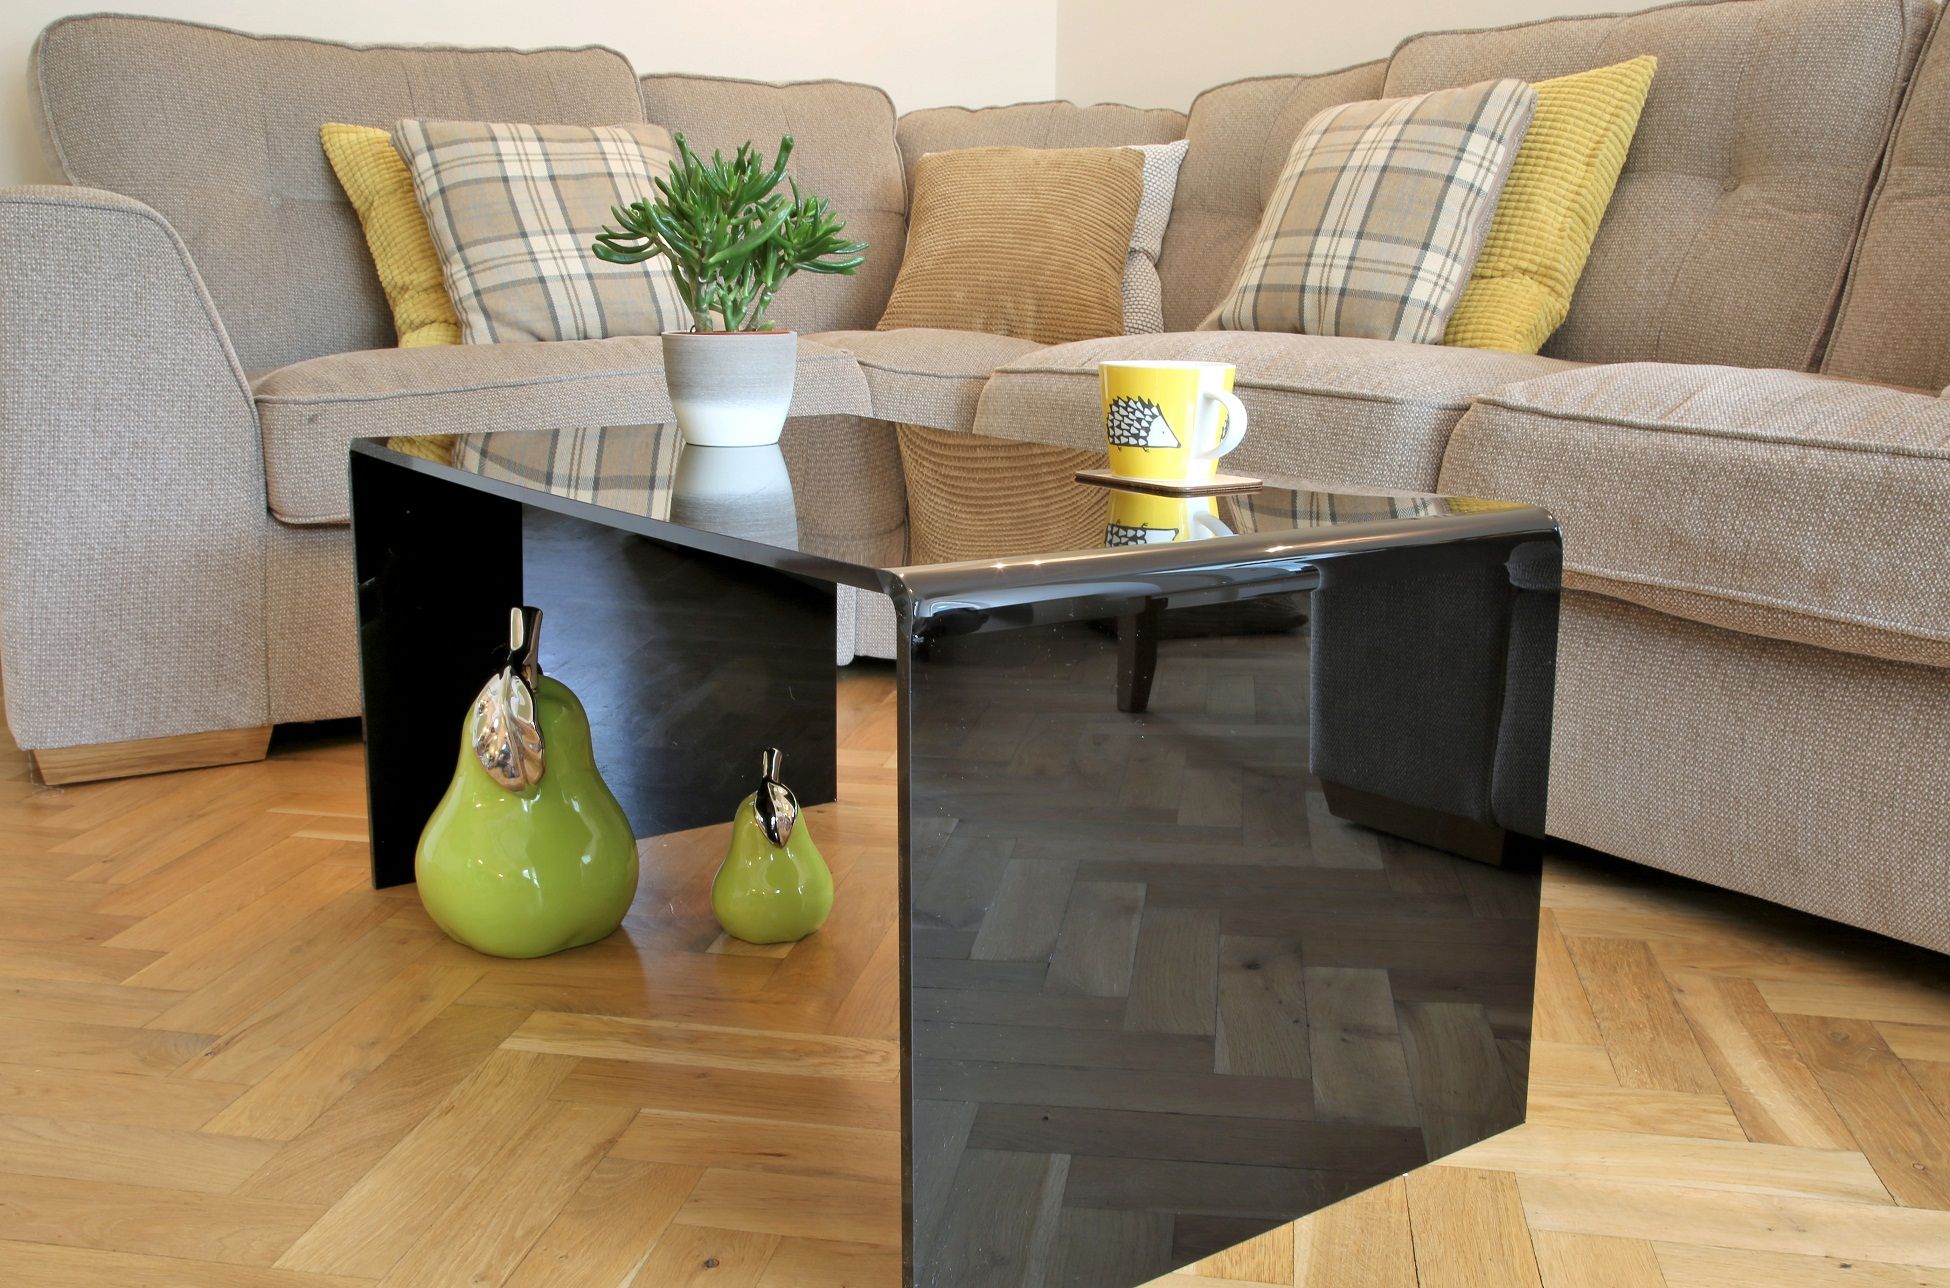 Acrylic Coffee Tables | Latest Designs | Free Delivery Inside Acrylic Modern Coffee Tables (View 8 of 15)